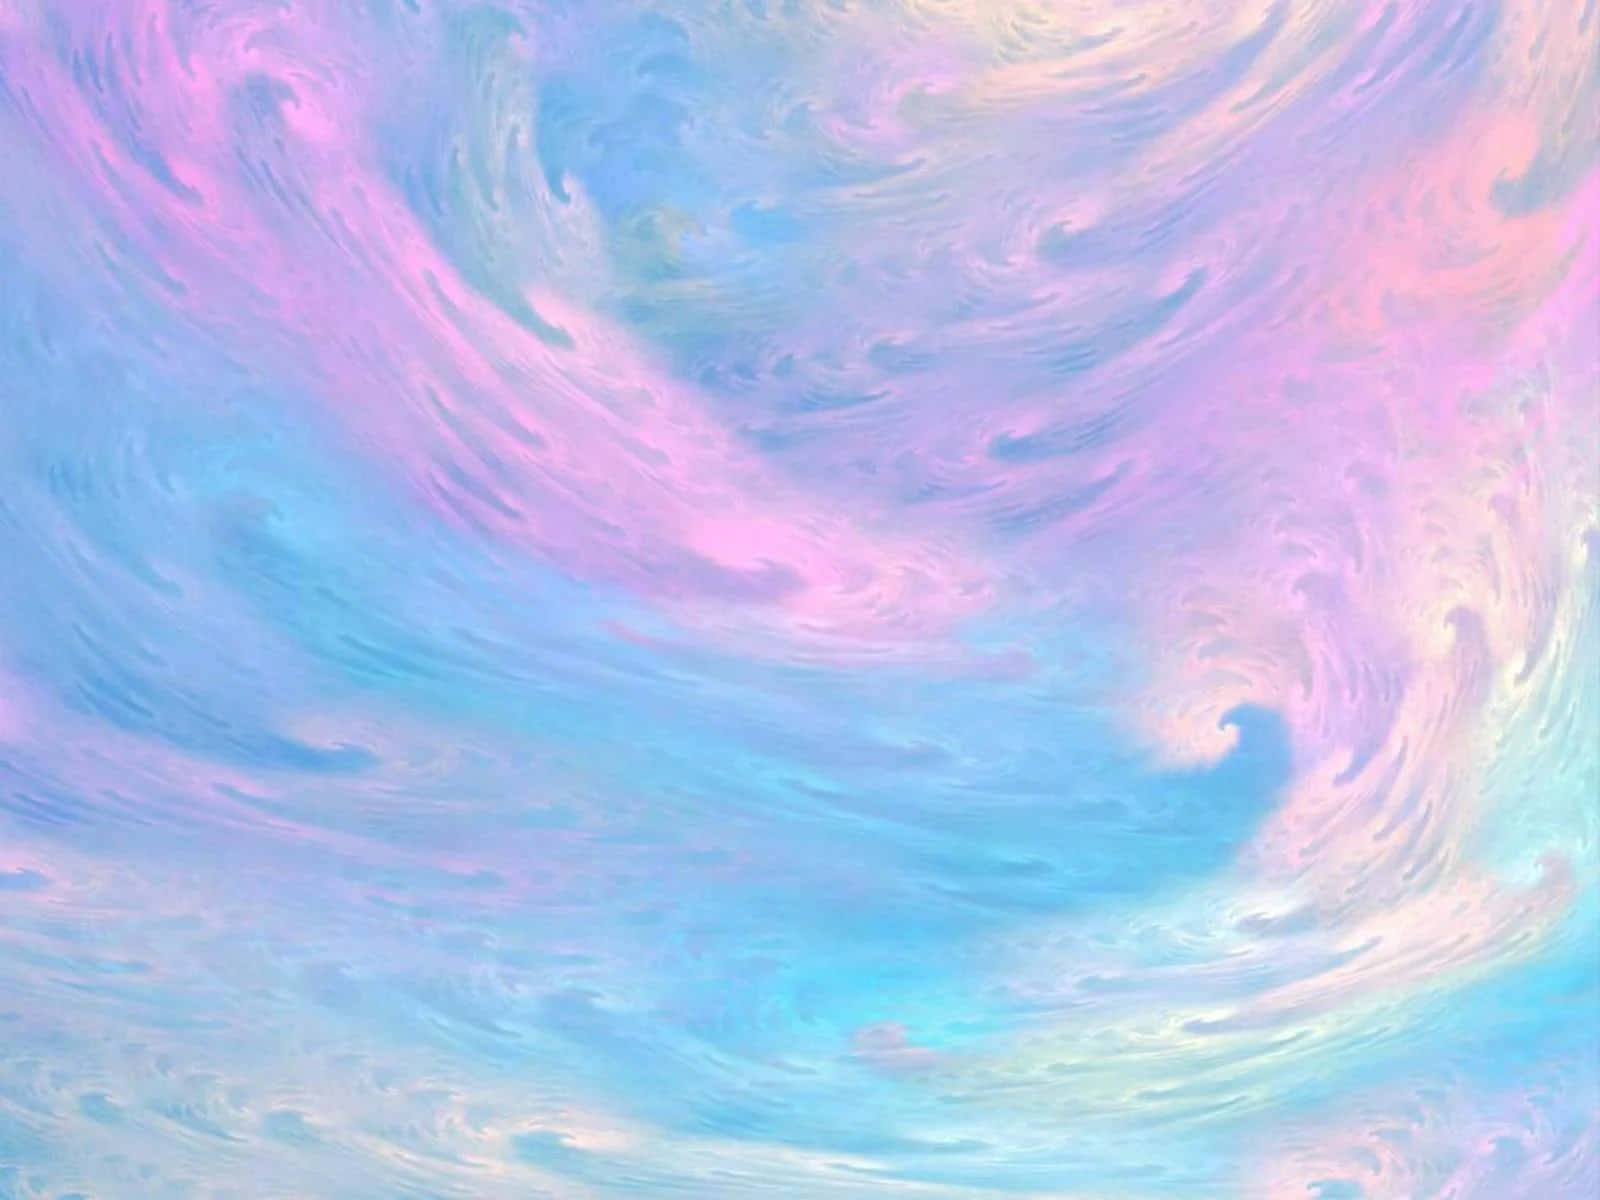 Admire the beauty of a pastel galaxy